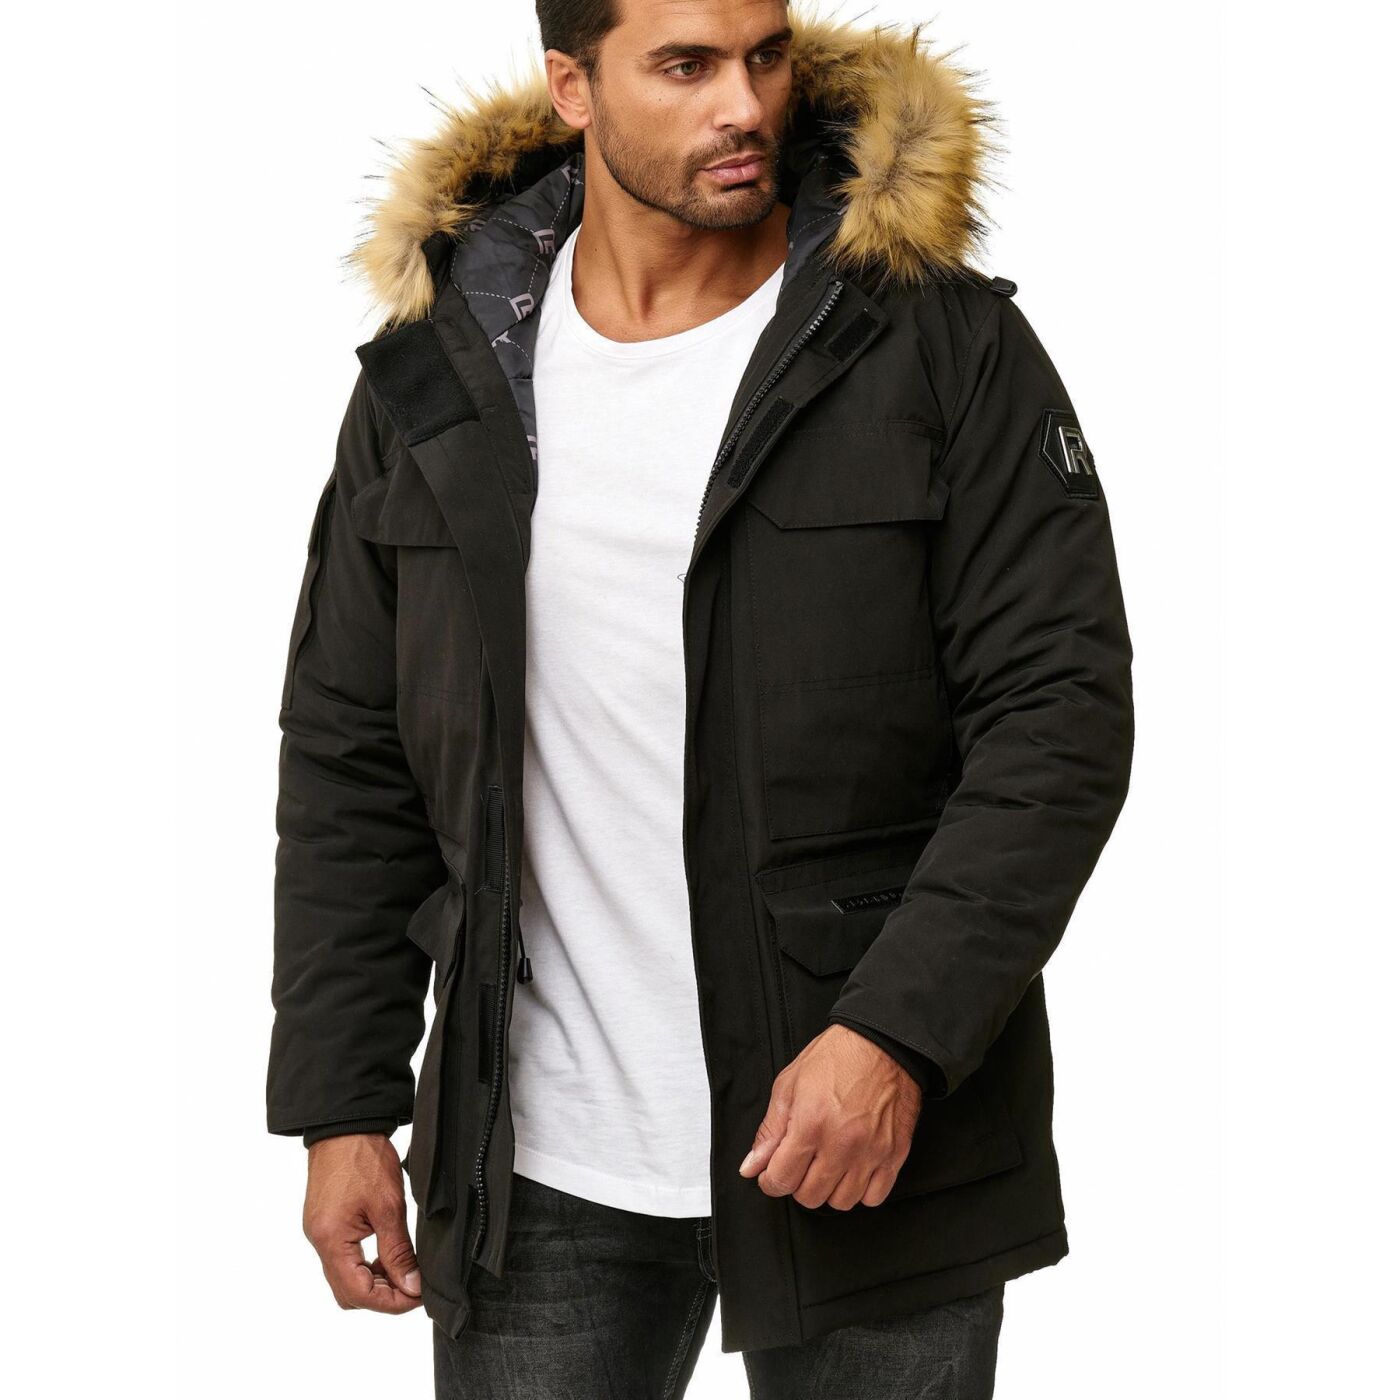 Proteck'd: How to pick the best Mens Coats | TechPlanet